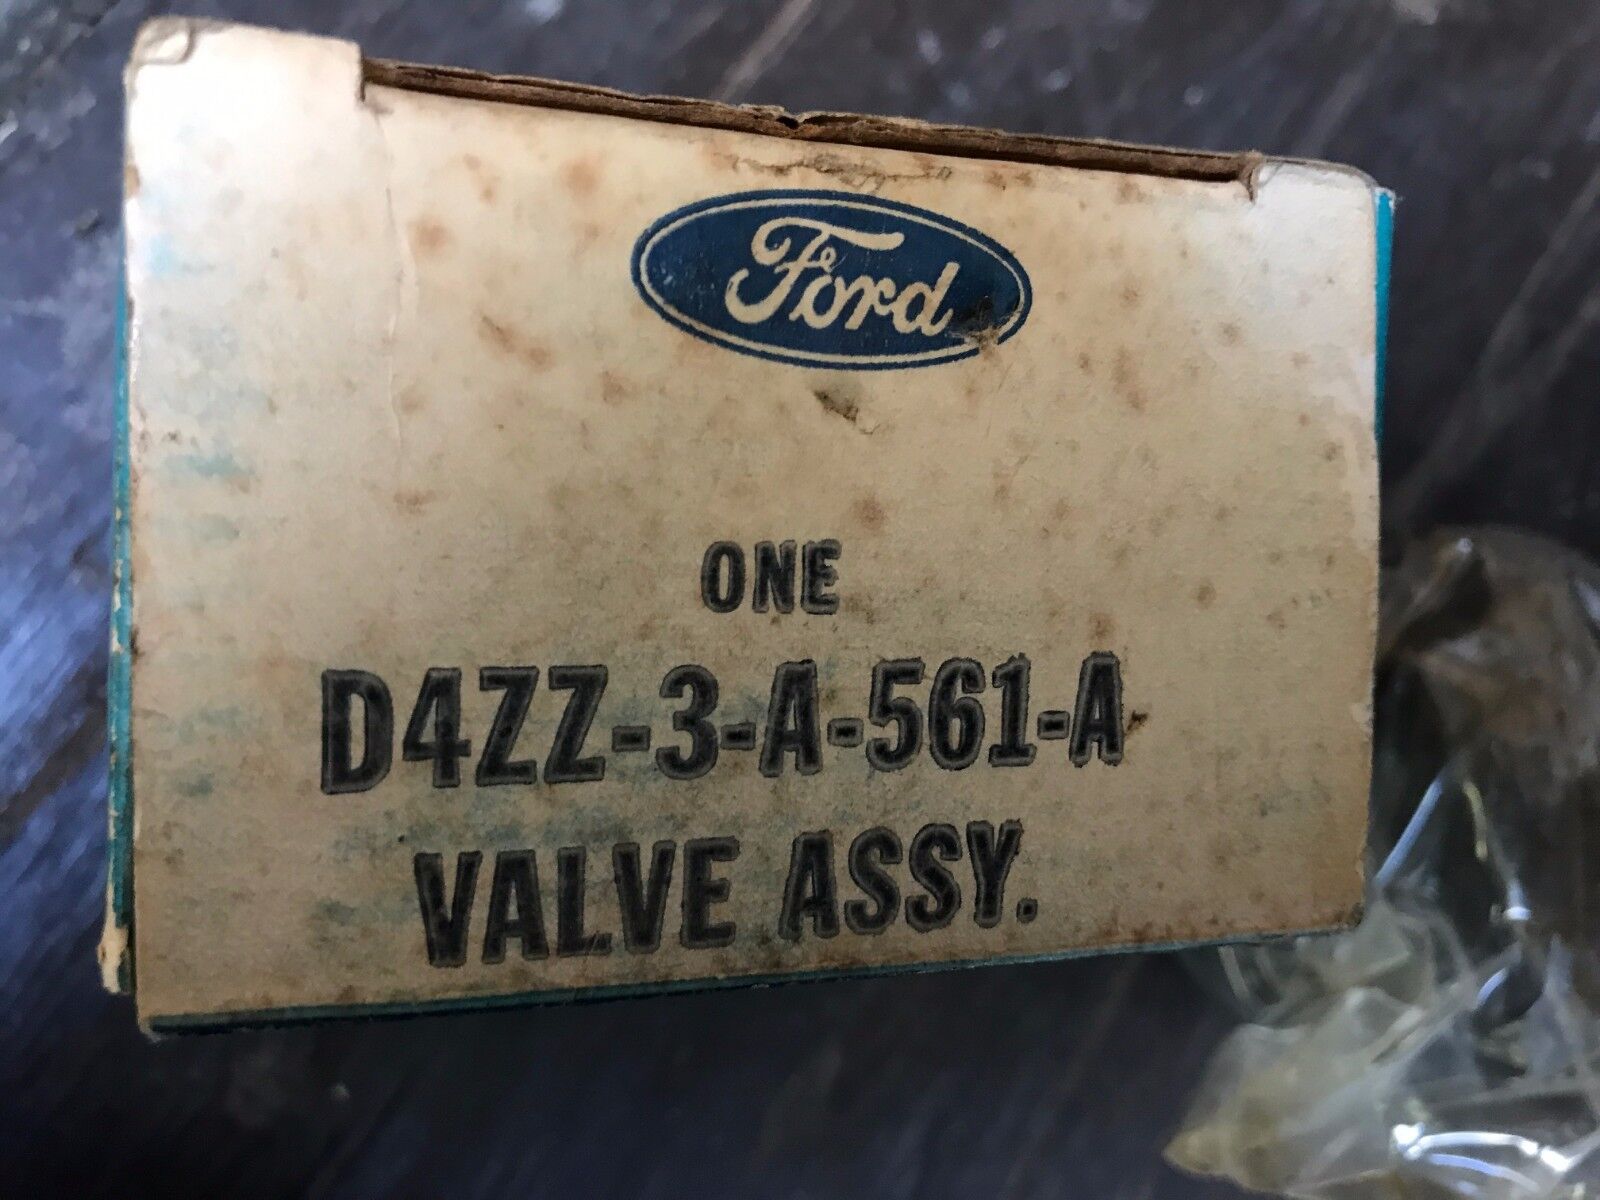 NOS 1974 - 1977 FORD MUSTANG II PINTO POWER STEERING PUMP VALVE D4ZZ-3A561-A NEW